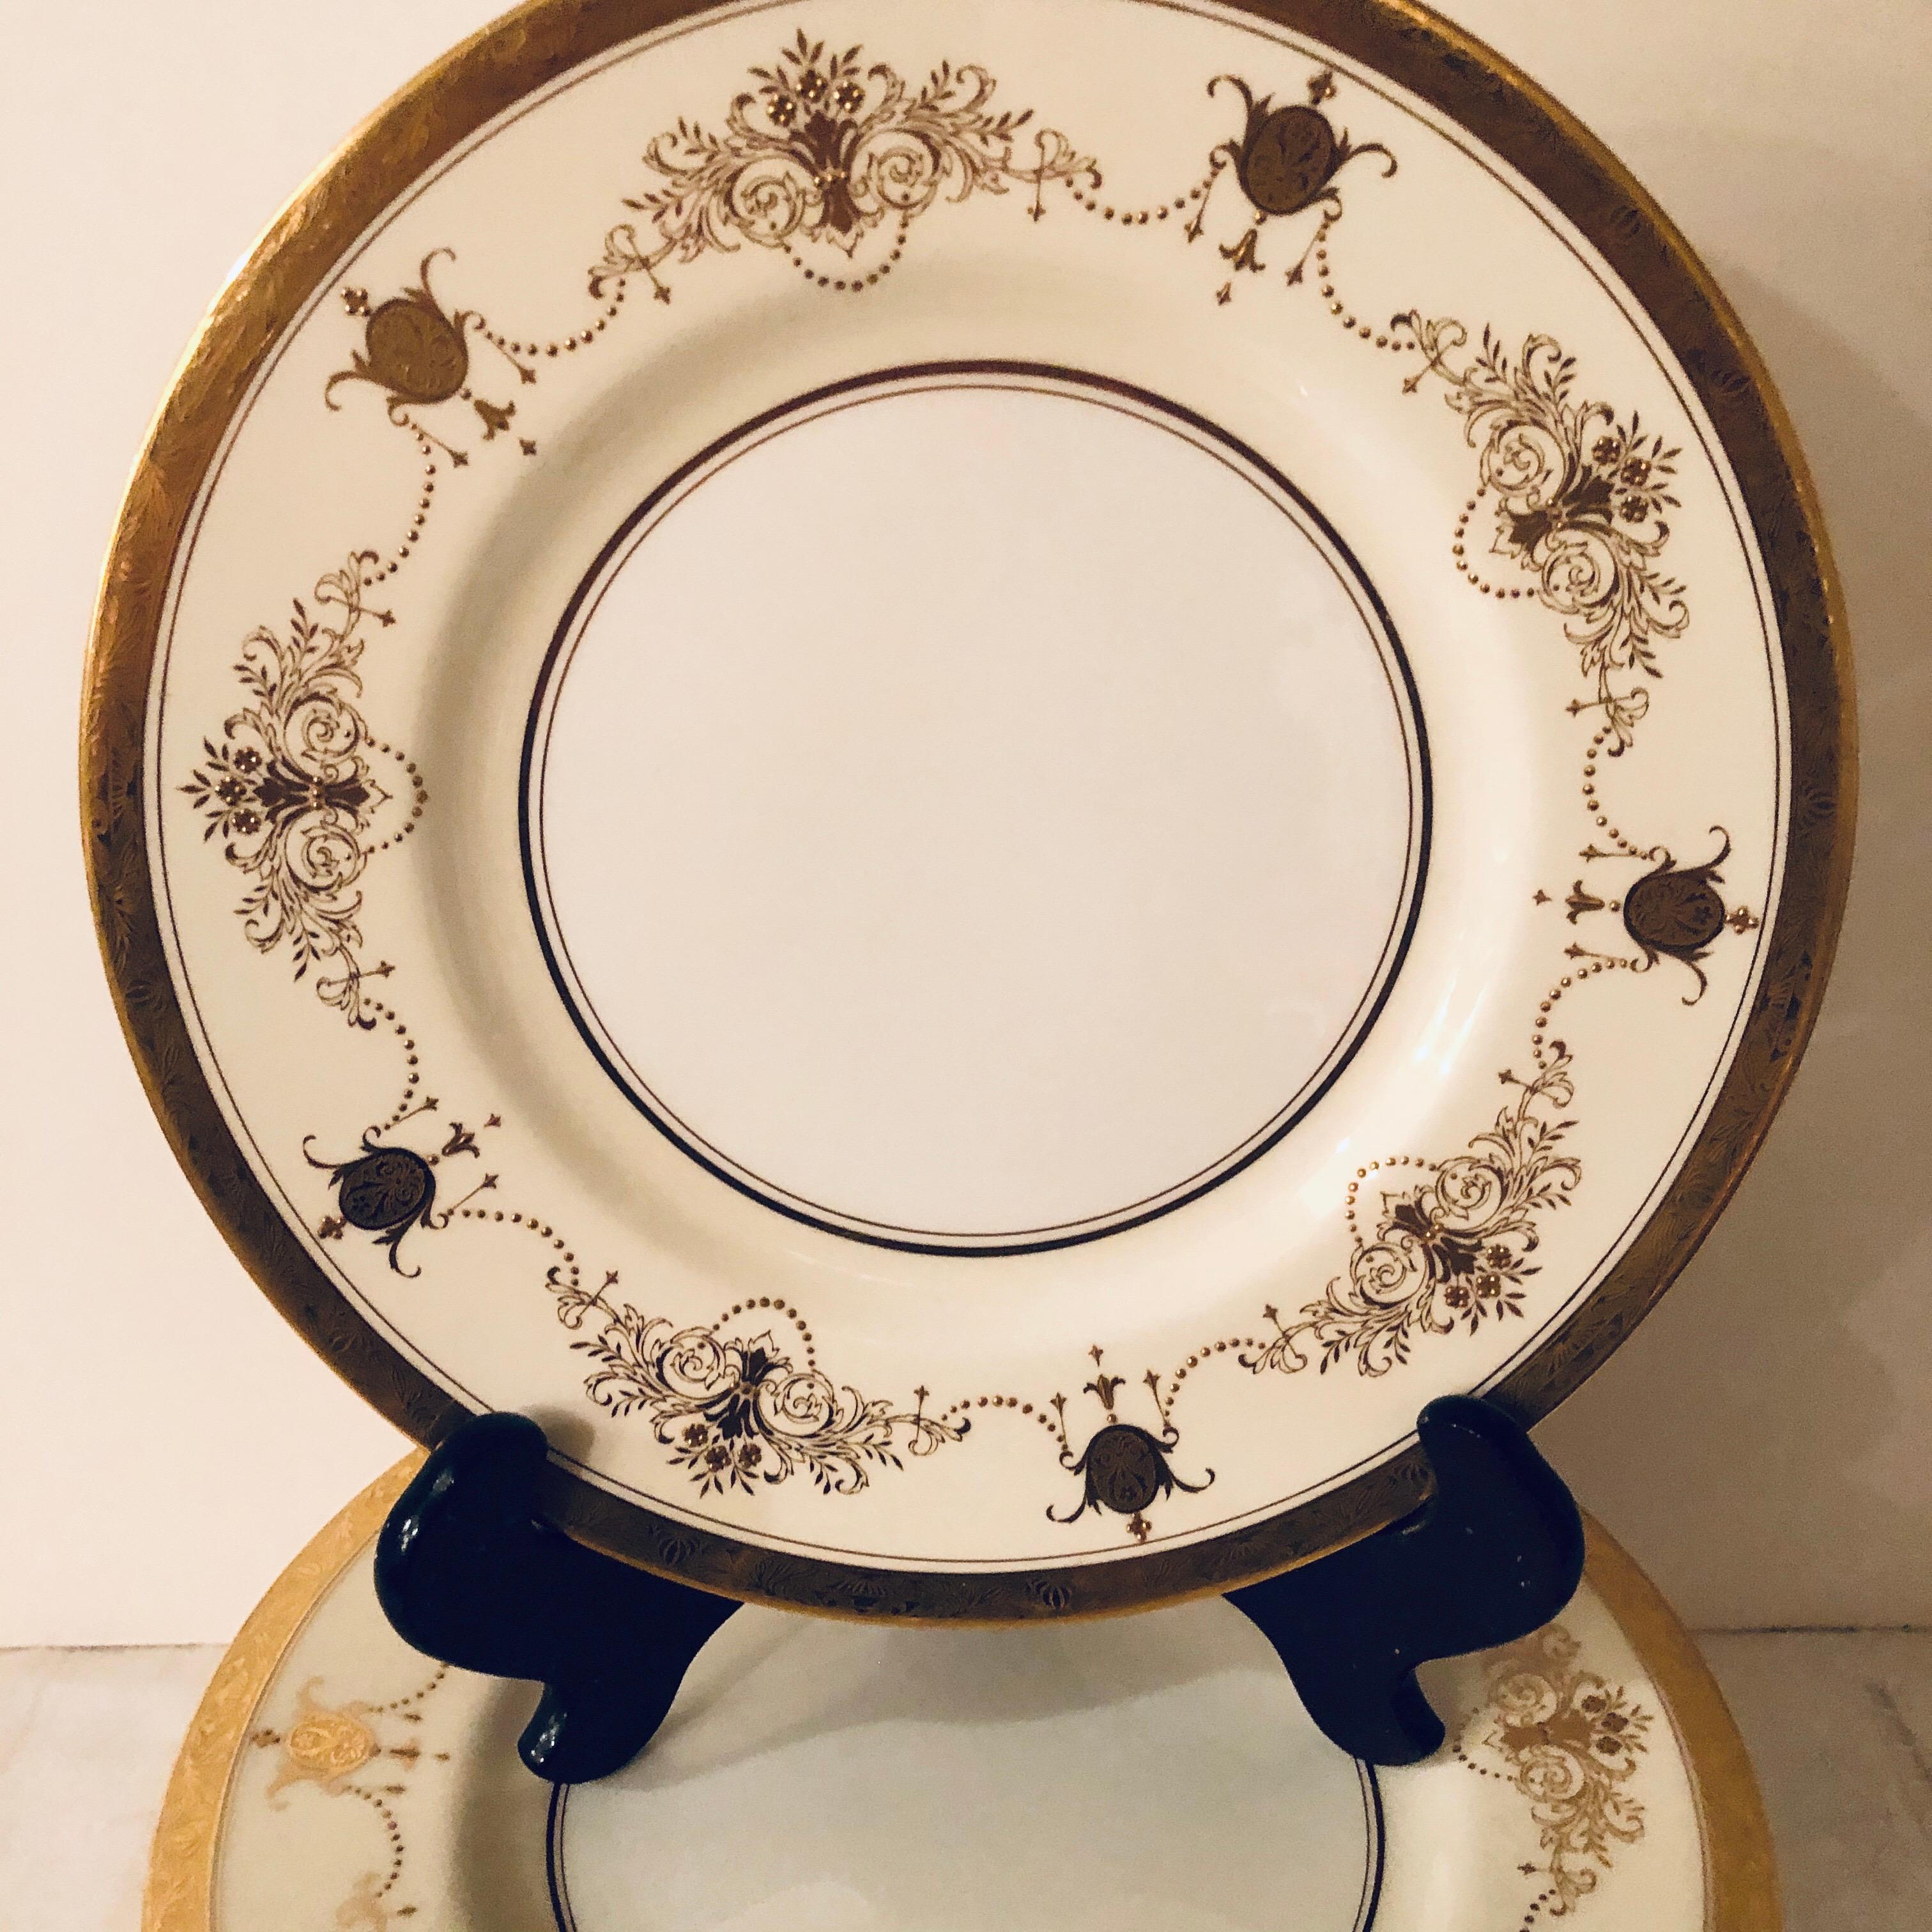 Porcelain Set of 12 Minton Dinner Plates Decorated with Ribbons of Raised Gilded Jeweling For Sale